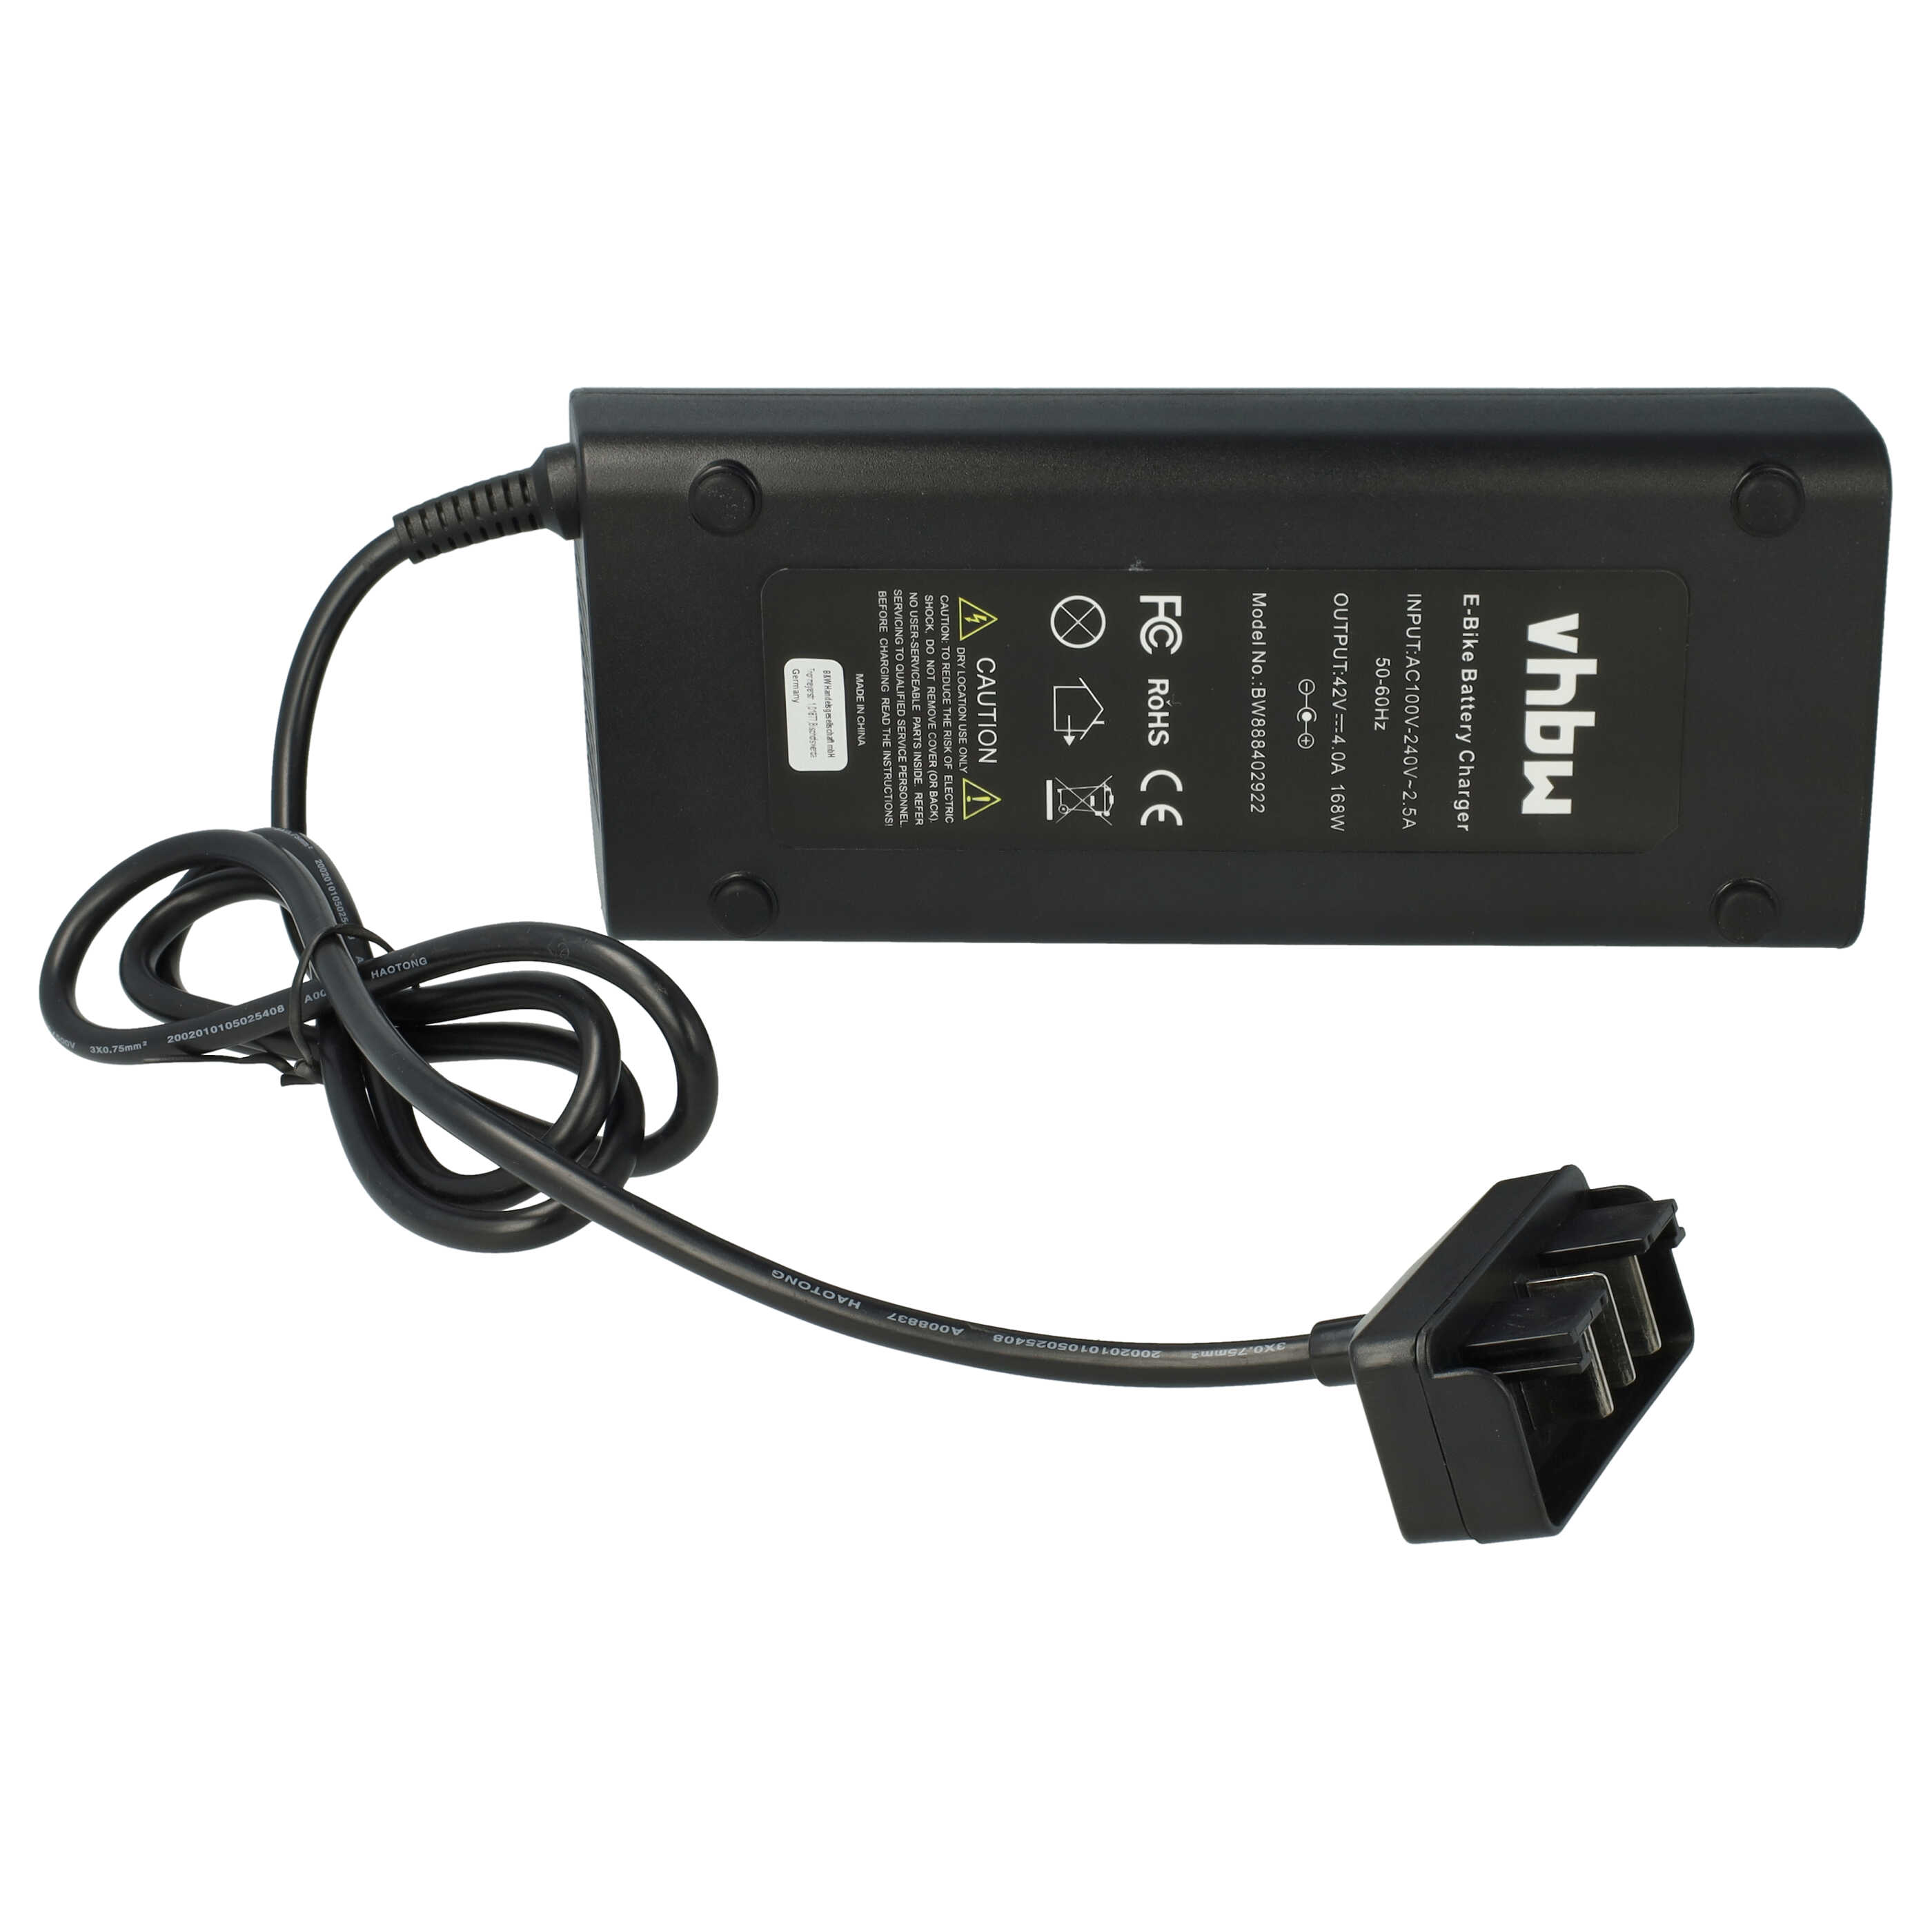 Charger replaces Bosch 0.275.007.905, 0 275 007 905, 0275007905 for E-Bike Battery - 4.0 A